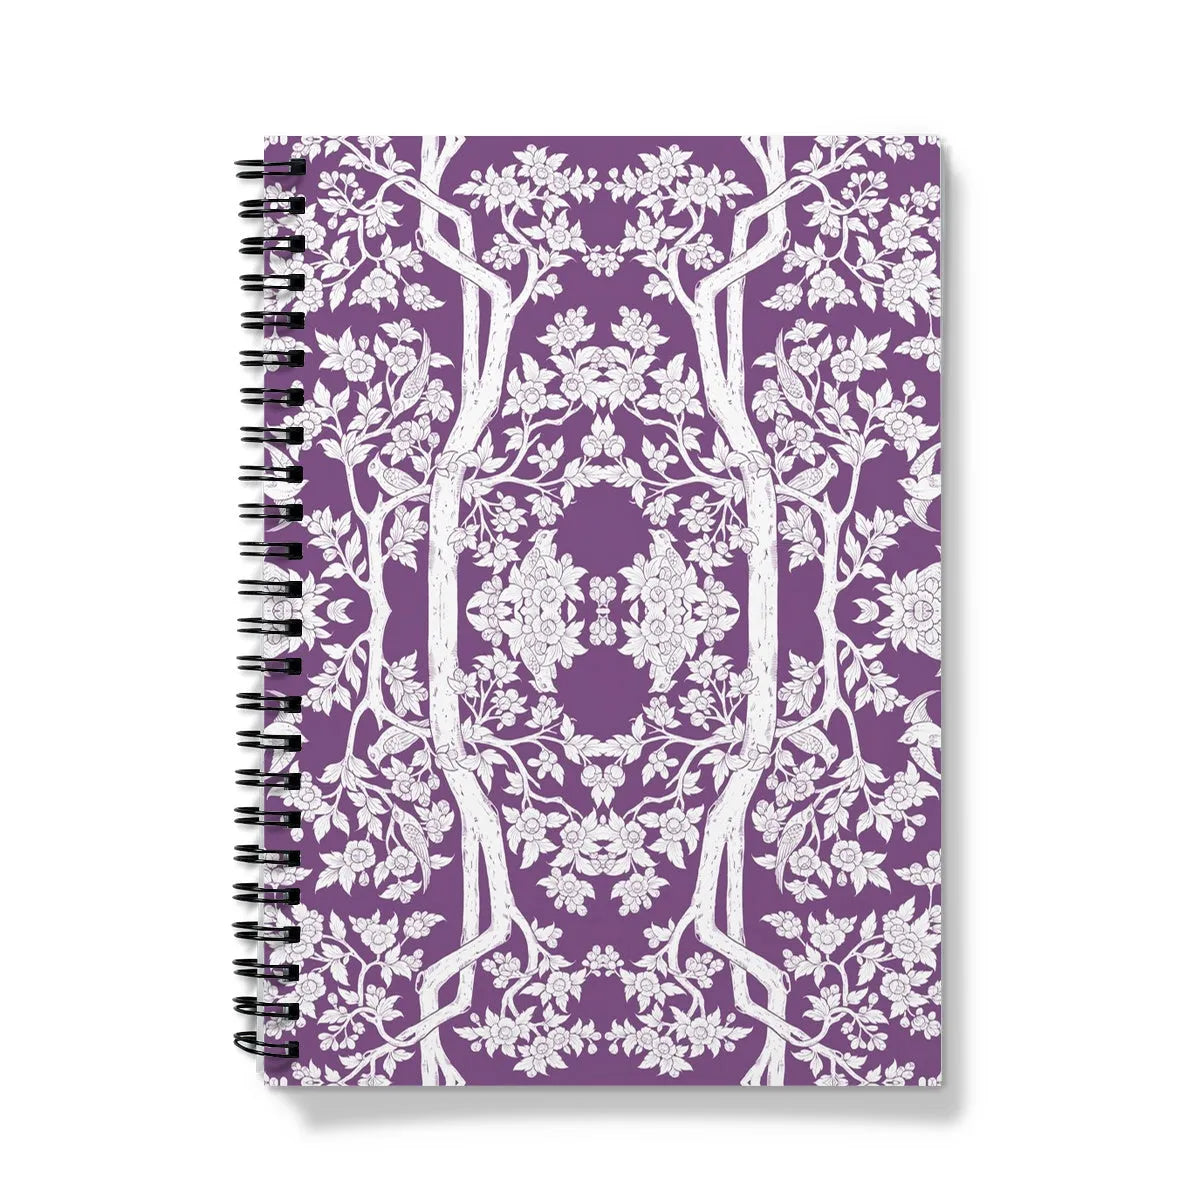 Aviary Purple Notebook - A5 - Graph Paper - Notebooks & Notepads - Aesthetic Art